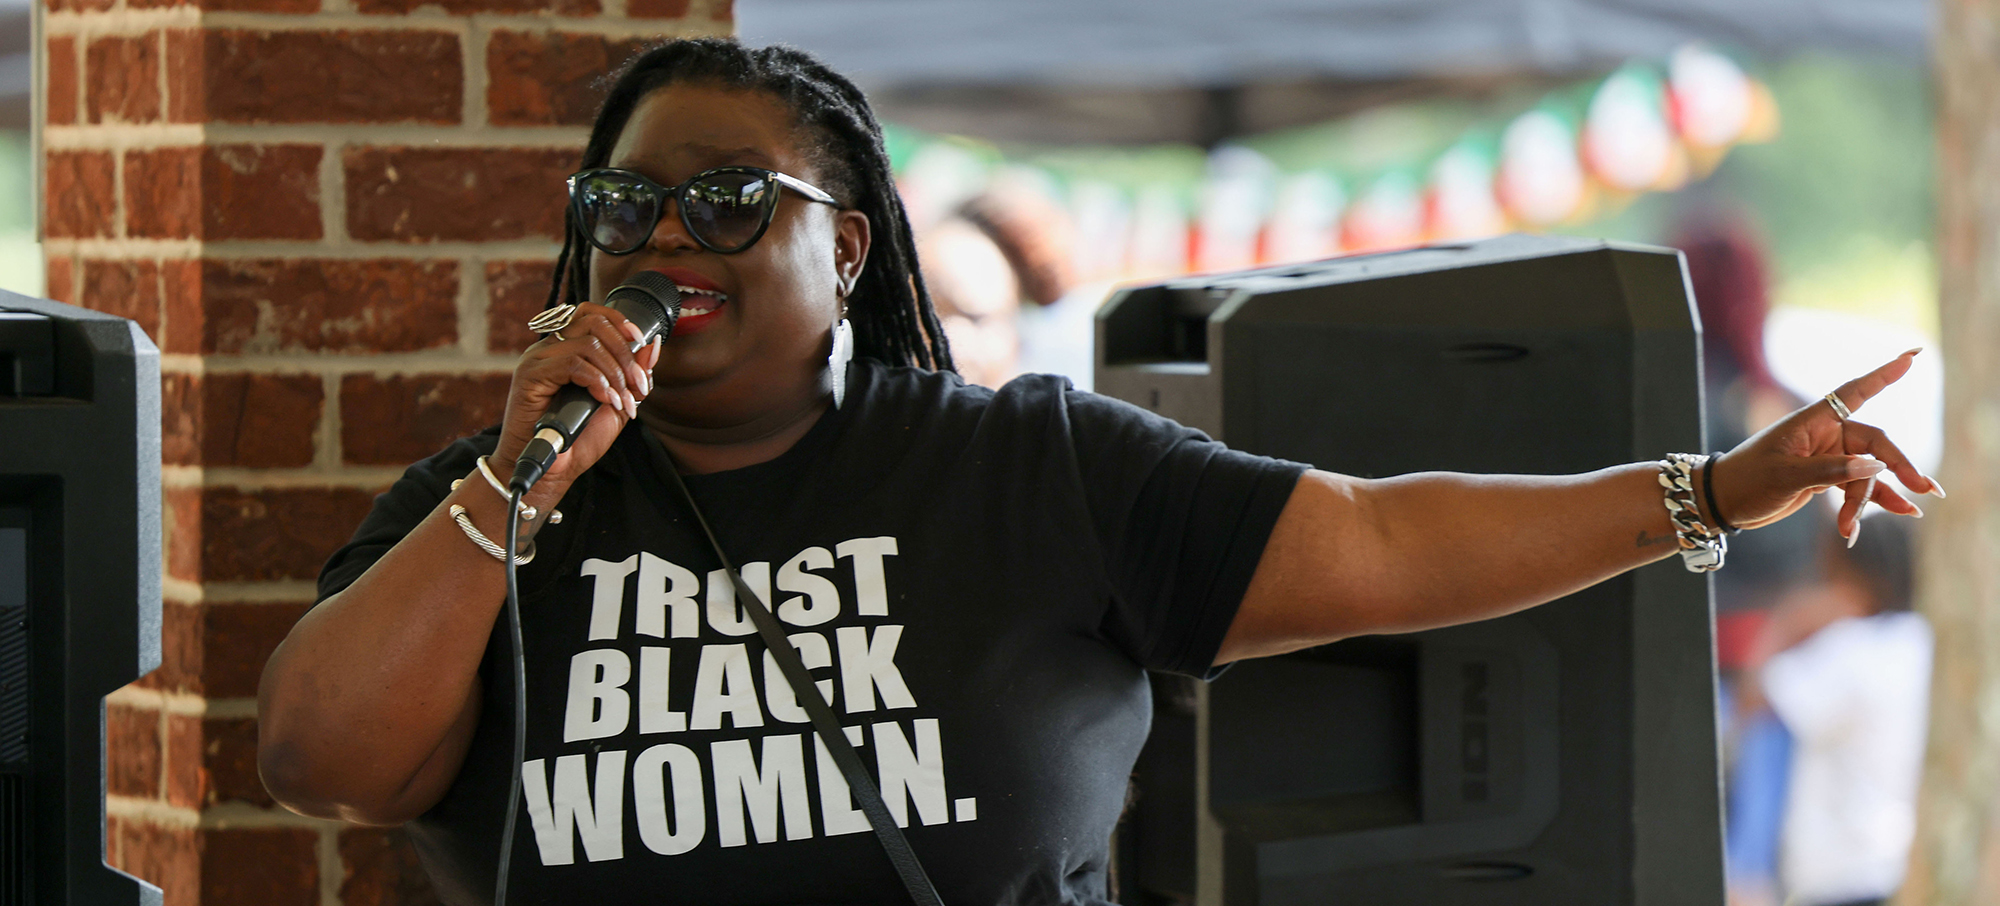 Monica Simpson, executive director of the reproductive justice organization SisterSong, speaks to the crowd at a Juneteenth celebration in her hometown of Wingate, N.C. (Photo by Shelby Rae Wills/News21)